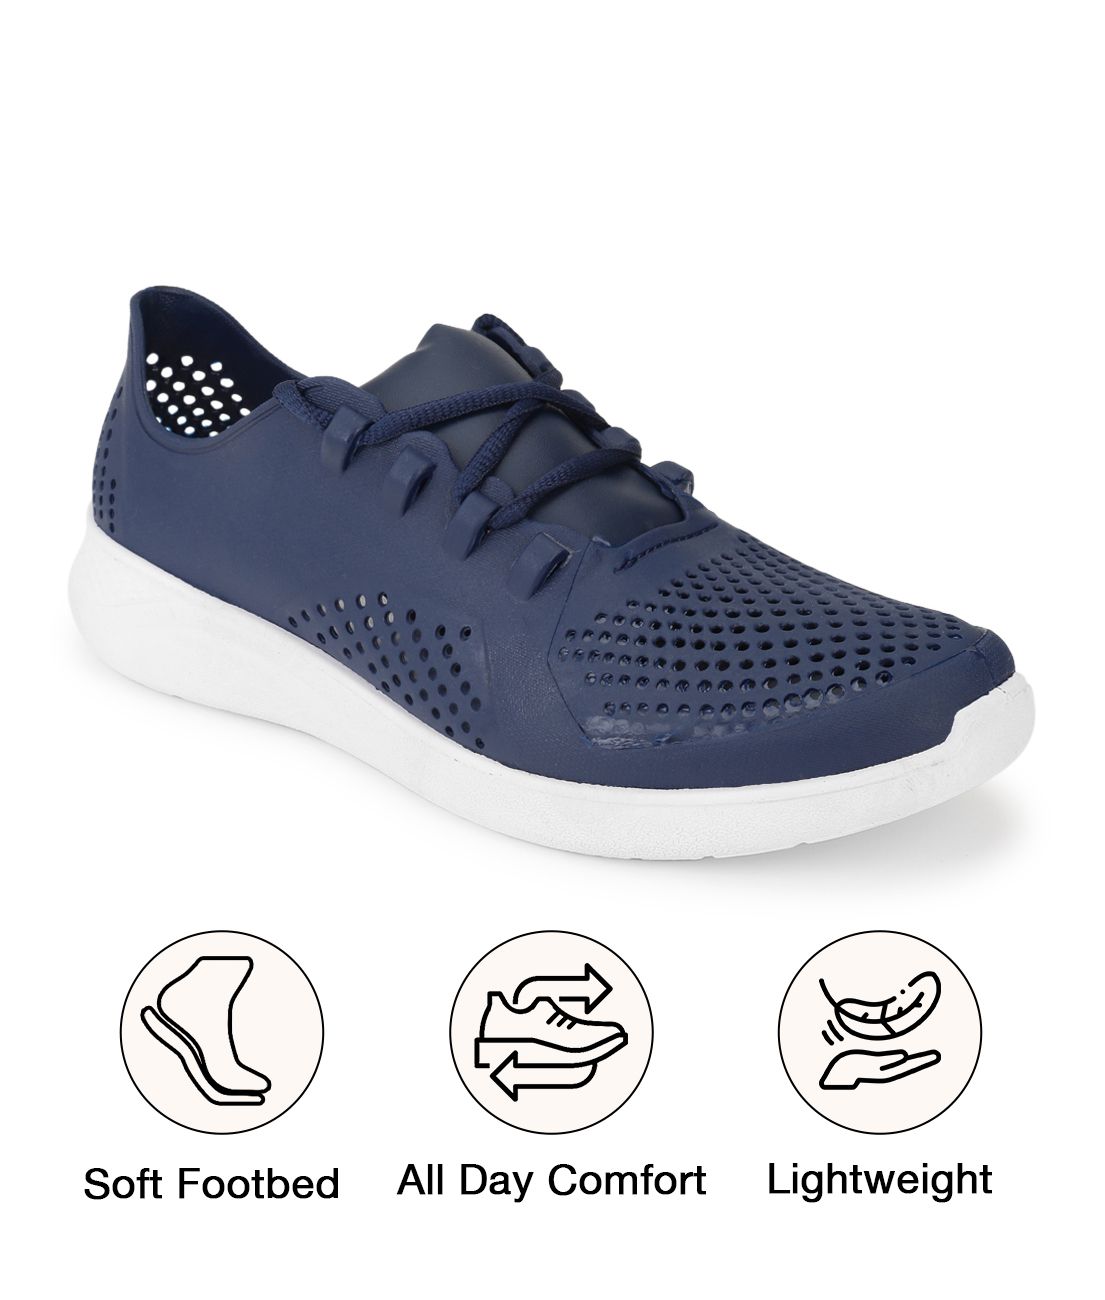     			UrbanMark Men Perforated Lace-Up Casual Sneaker Shoes- Navy